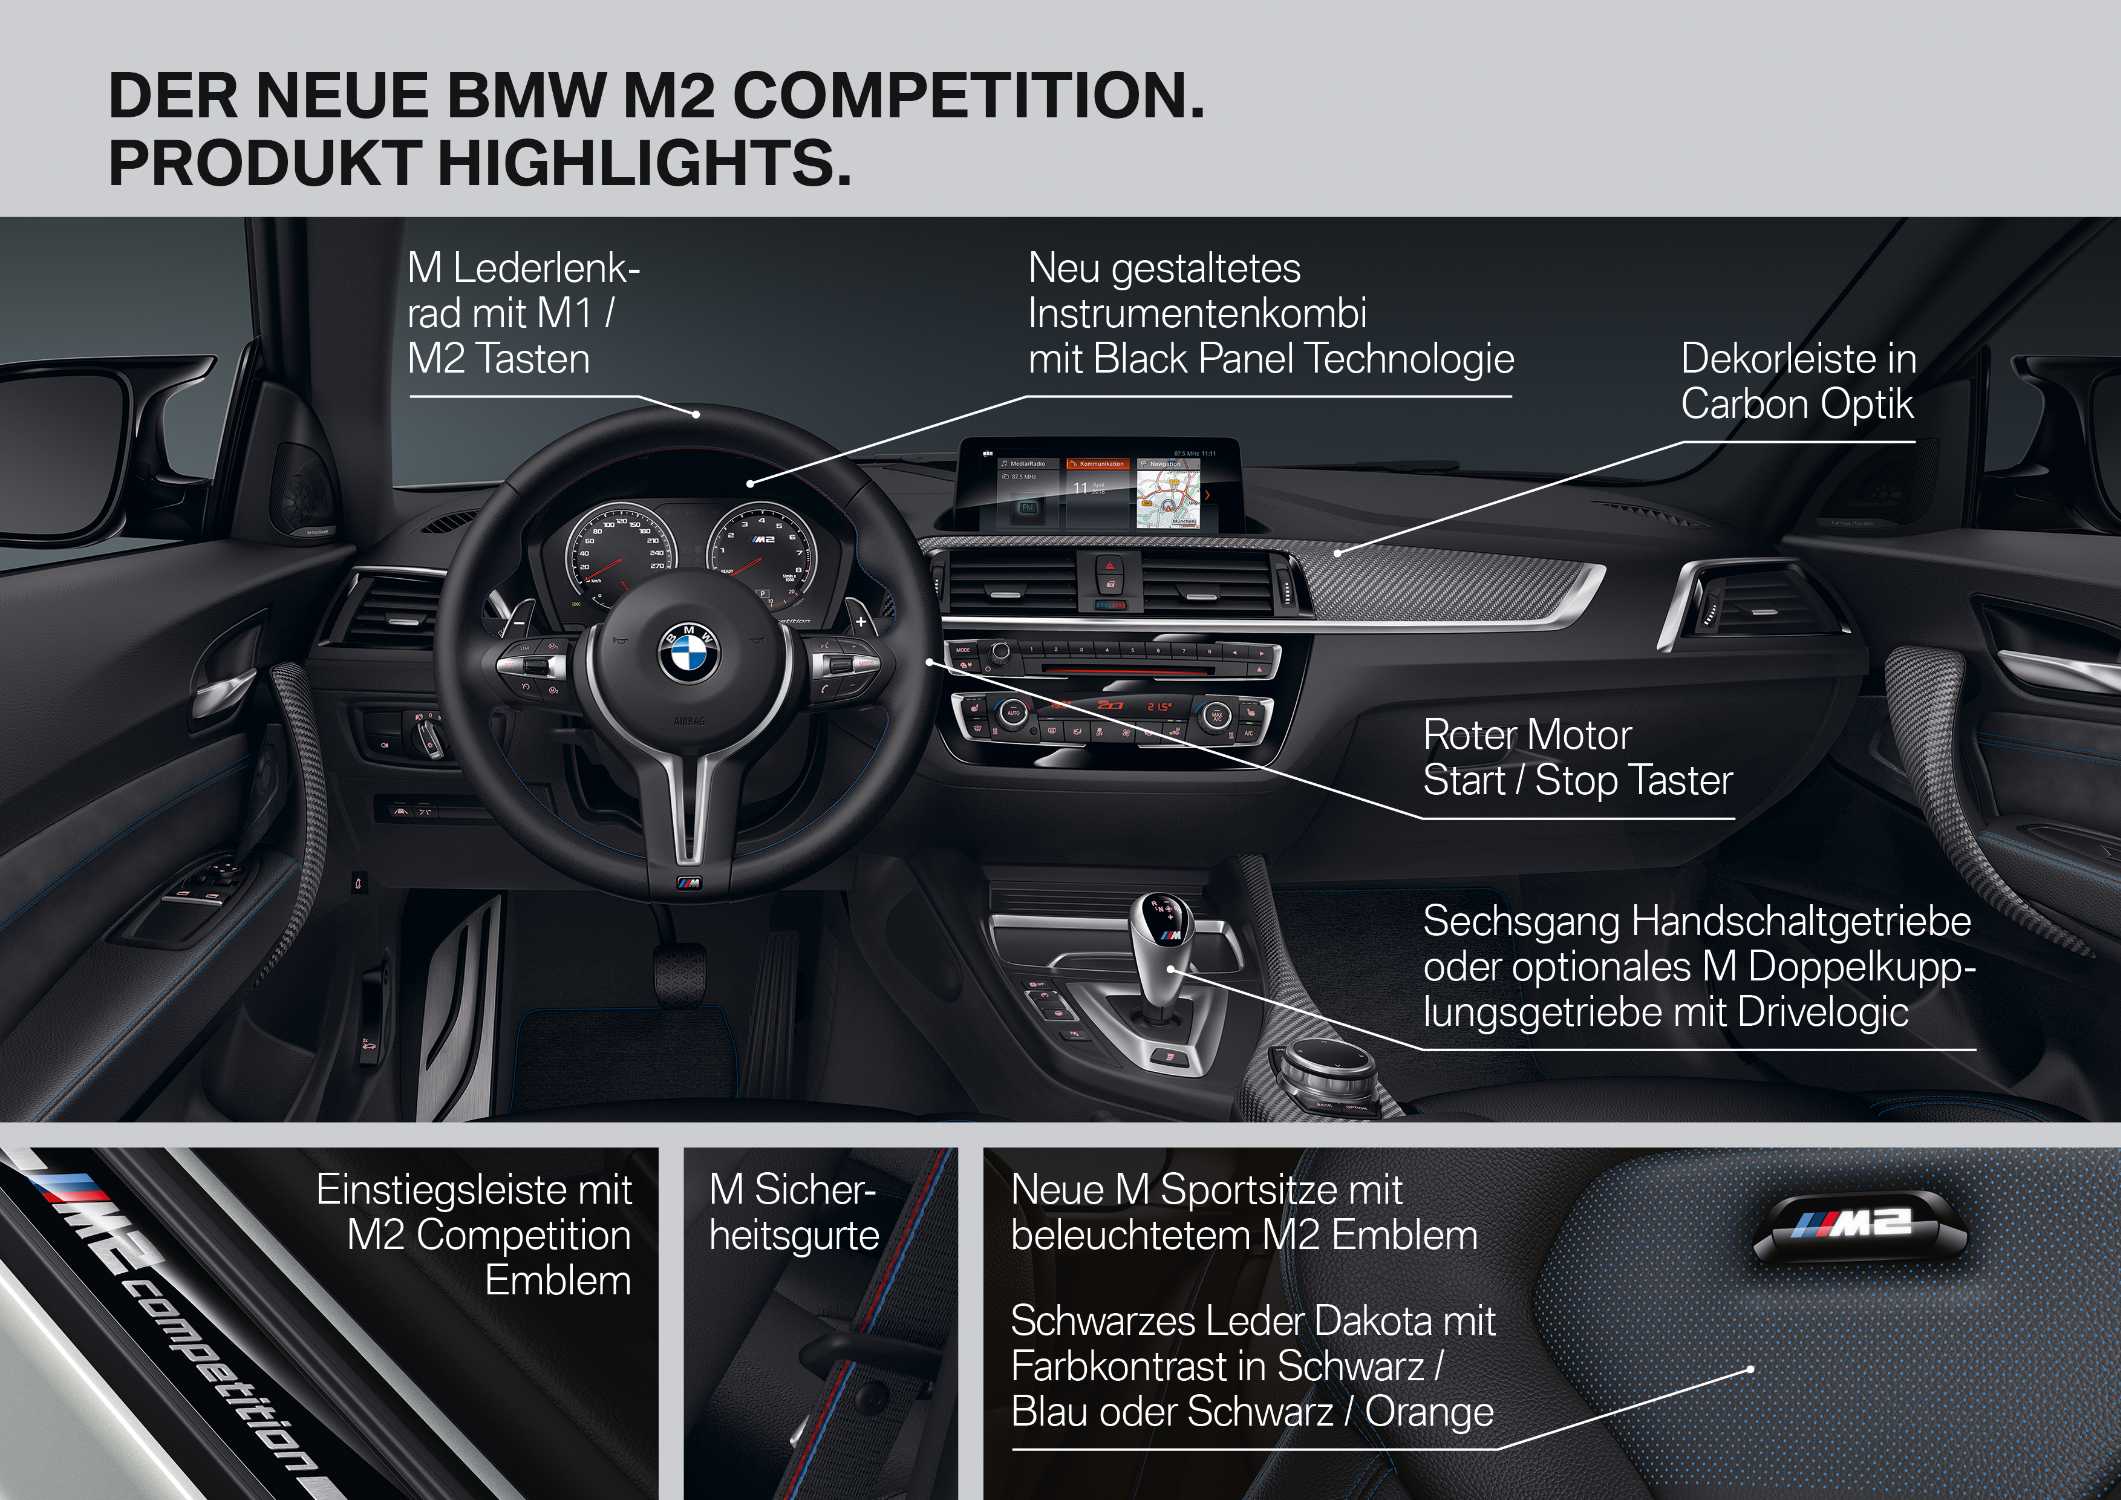 https://mediapool.bmwgroup.com/cache/P9/201803/P90297836/P90297836-the-new-bmw-m2-competition-04-2018-2121px.jpg